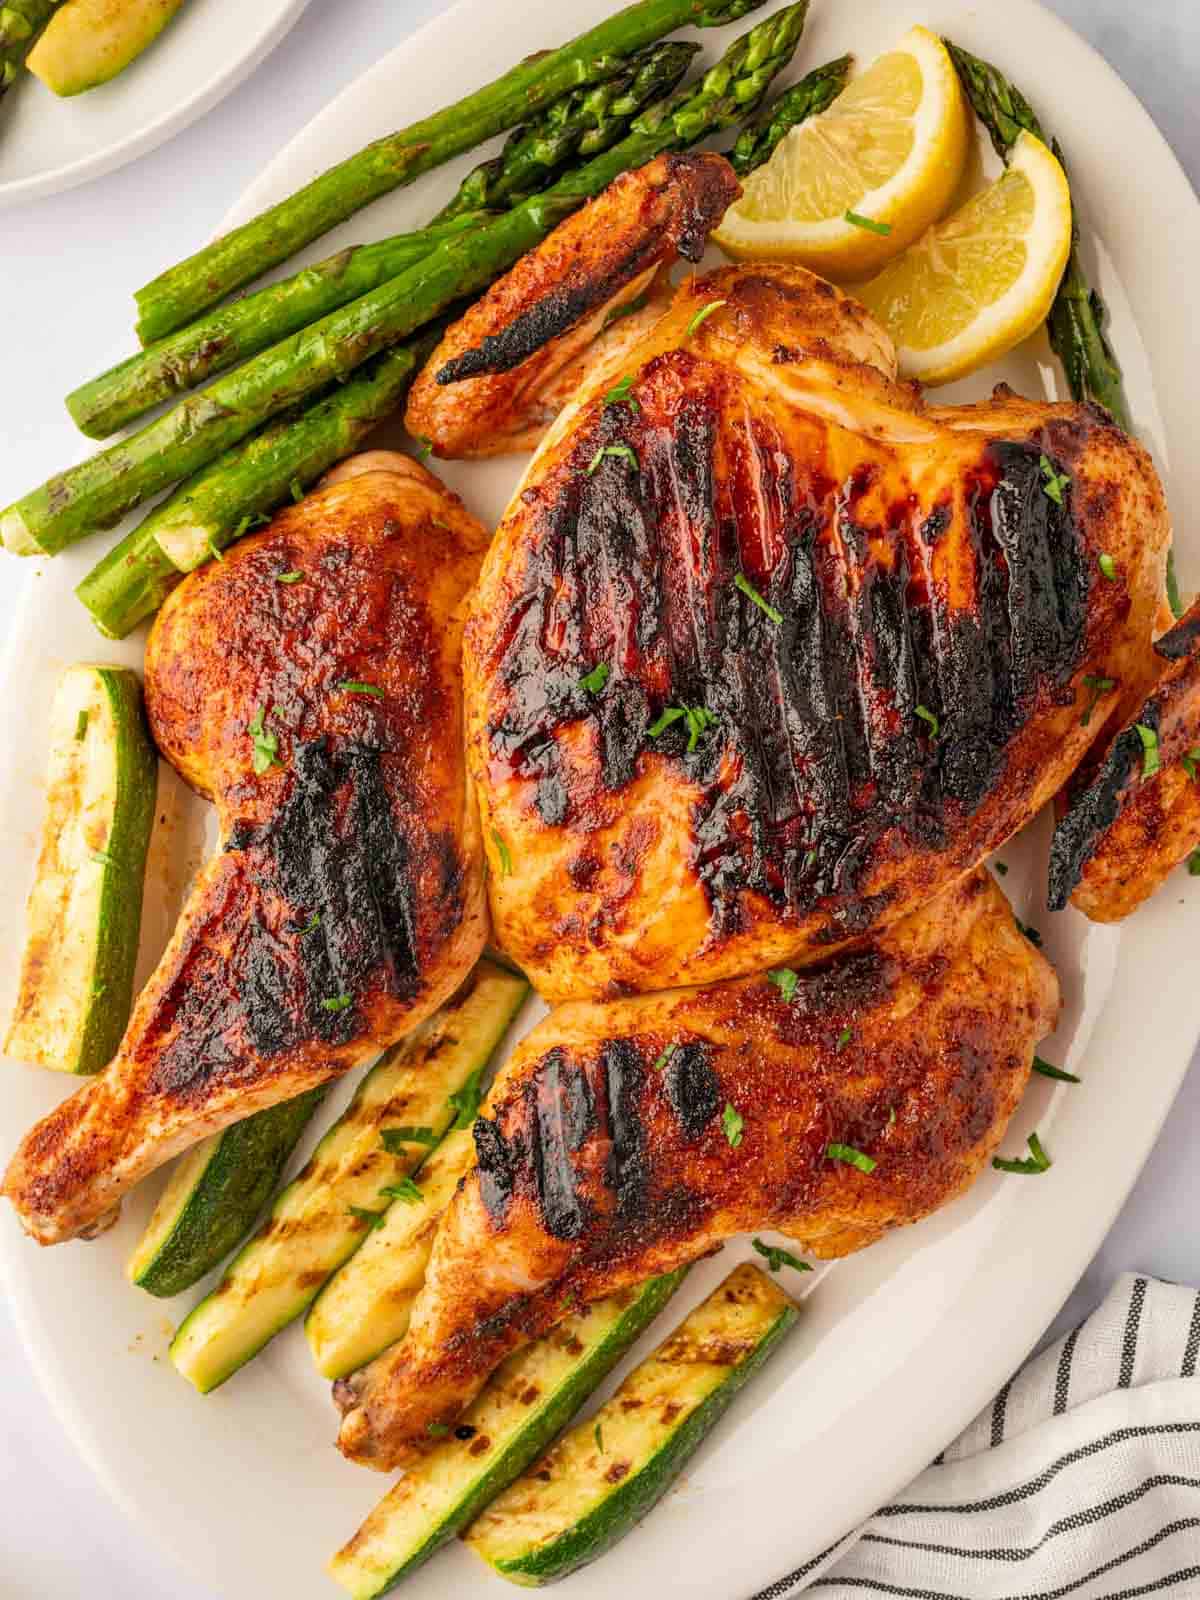 Charcoal grilled chicken on a platter with grilled vegetables.